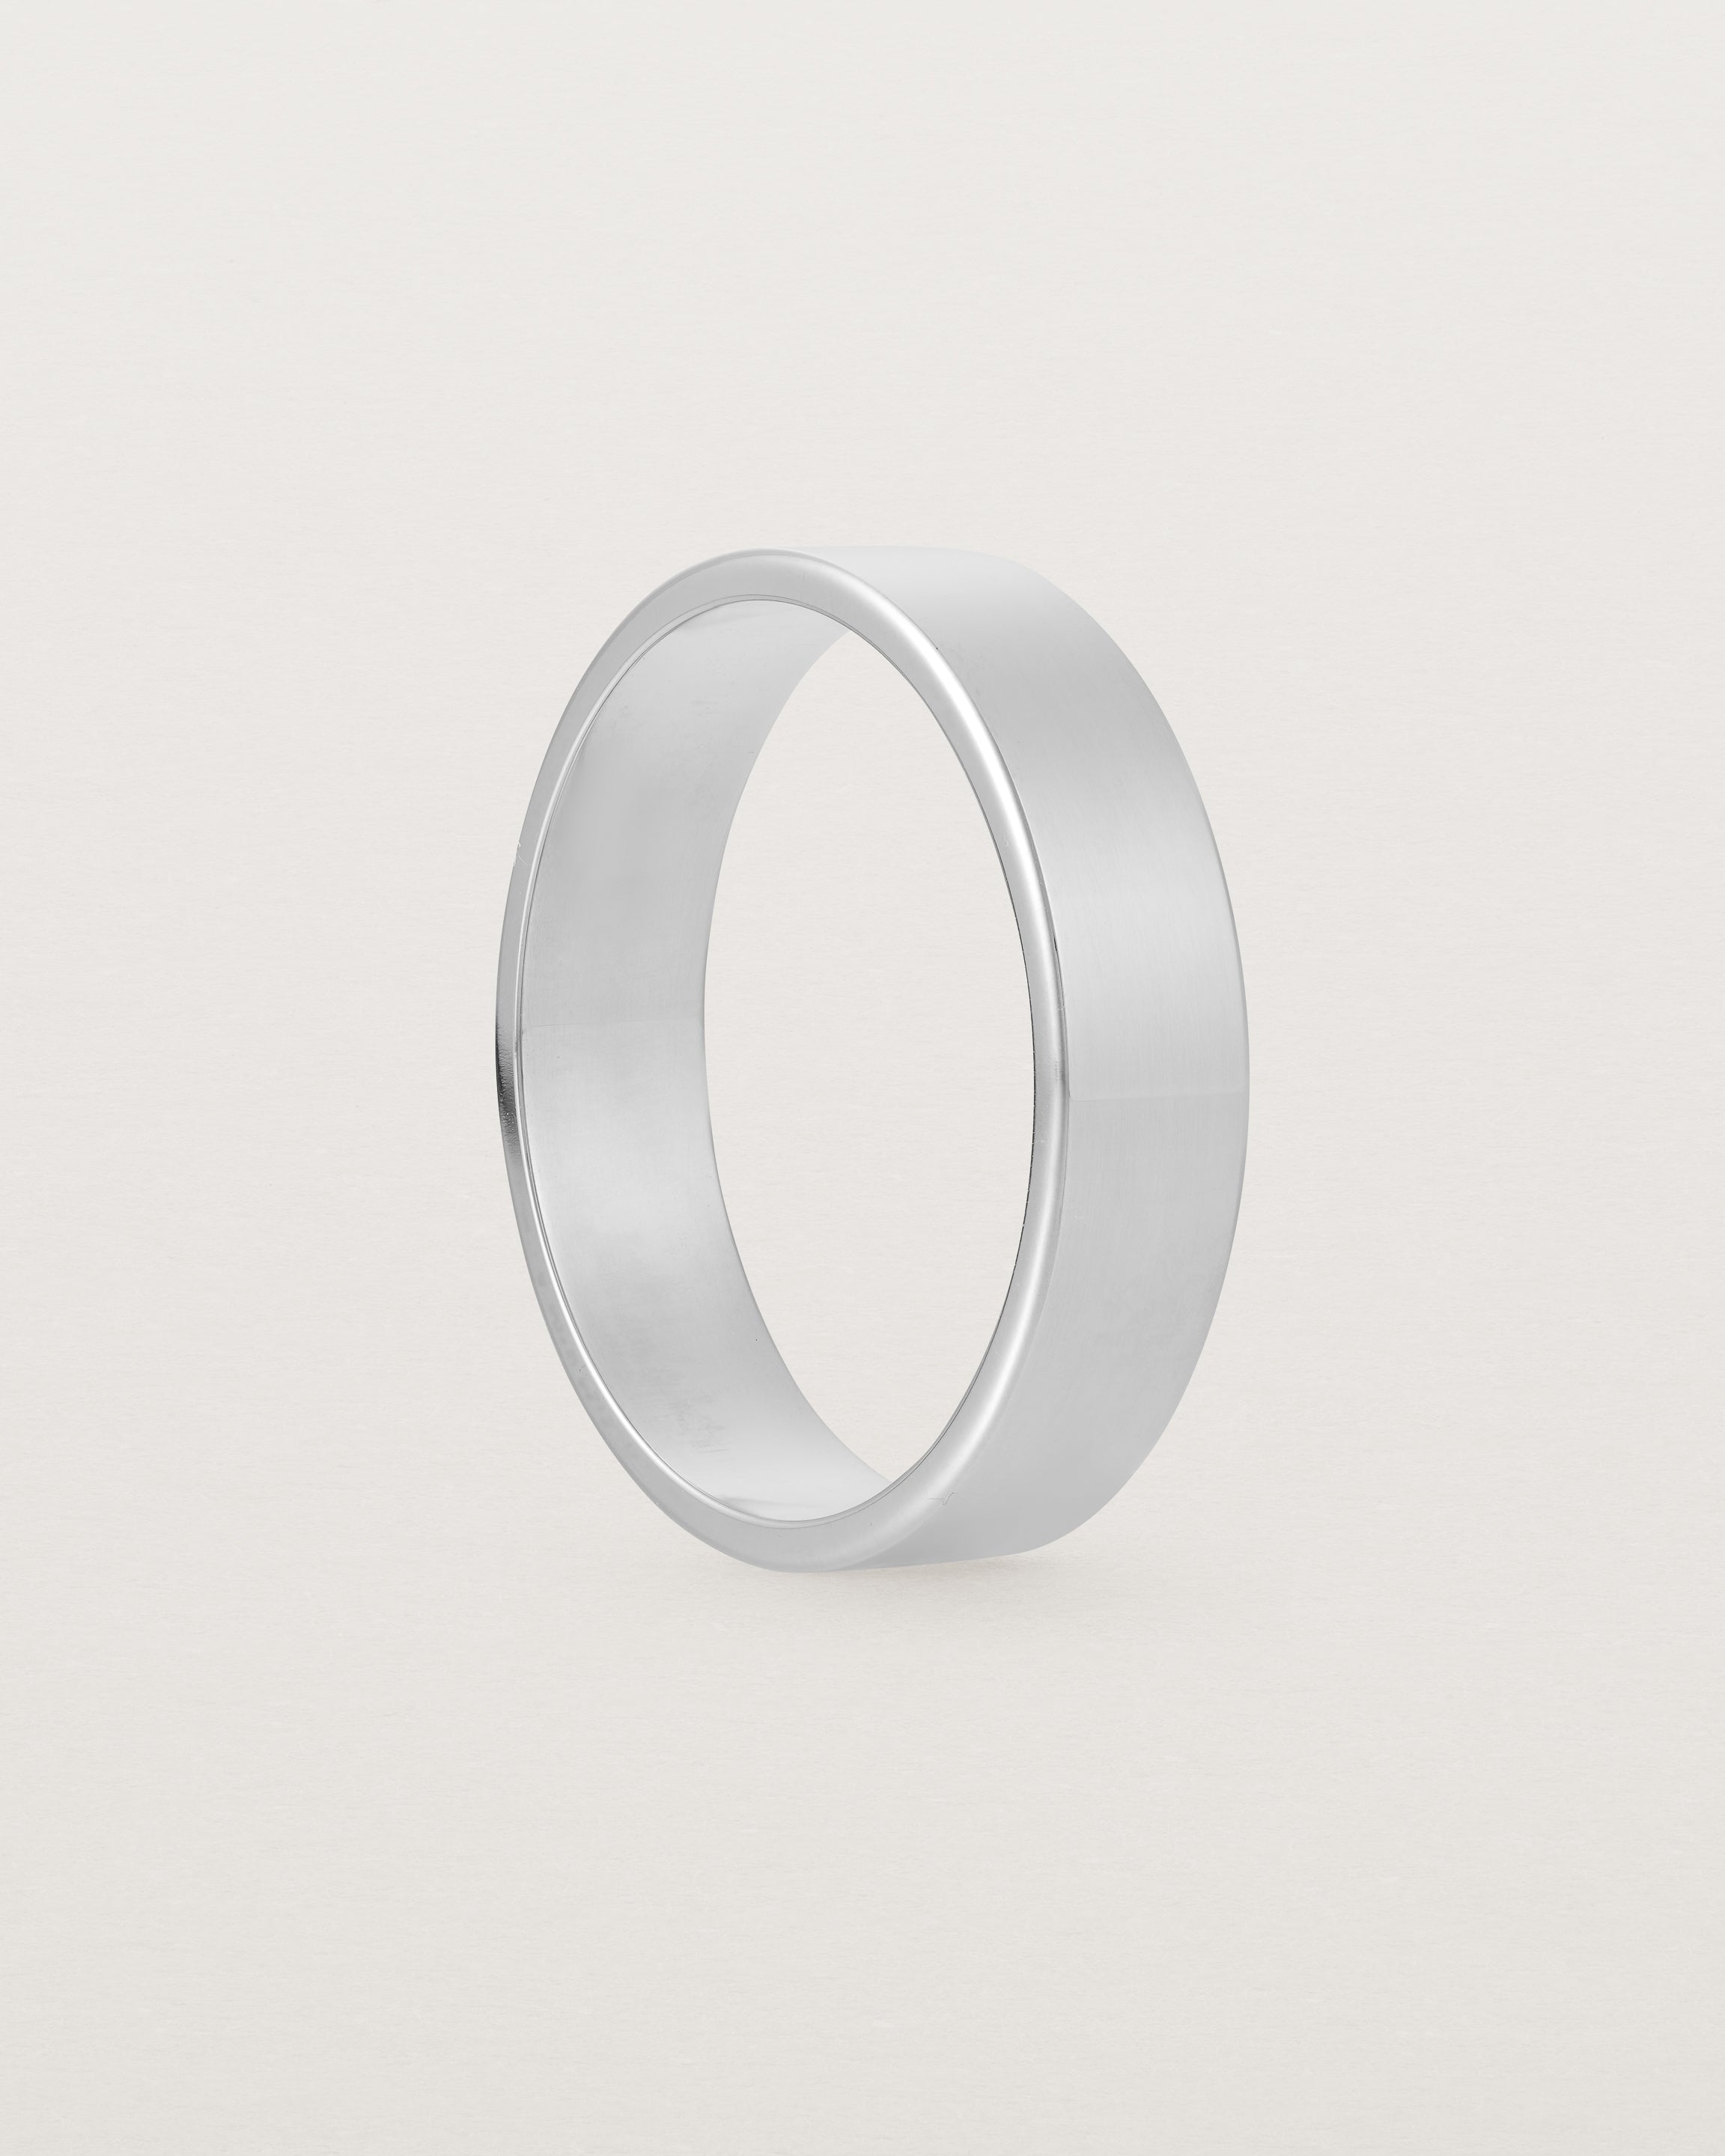 Side profile of our square, flat 5mm profile wedding band crafted in sterling silver